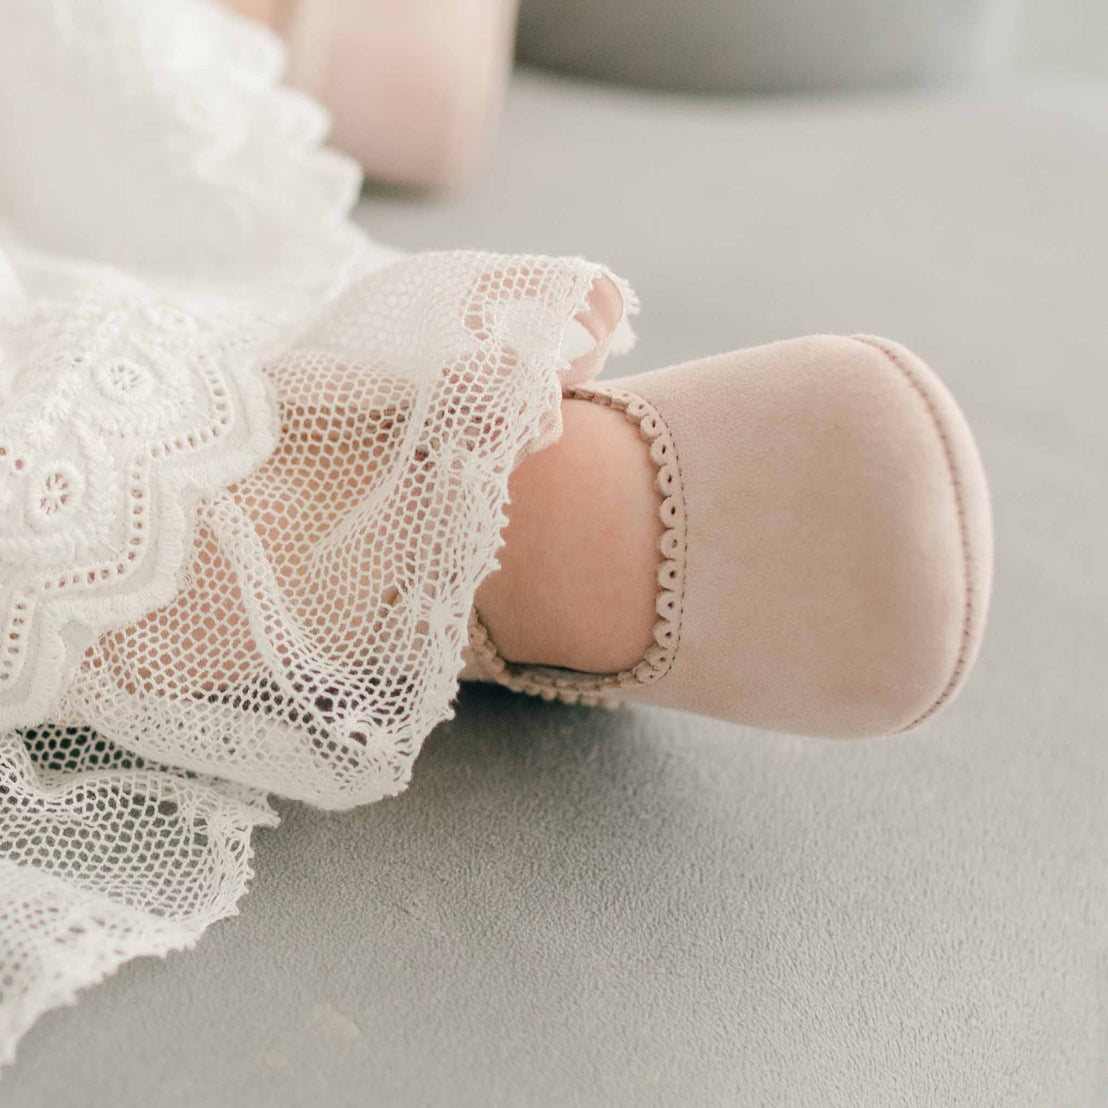 Baby girl wearing the blush Emily Suede Tie Mary Janes. Shoes are made with a soft suede with tie detail closure.